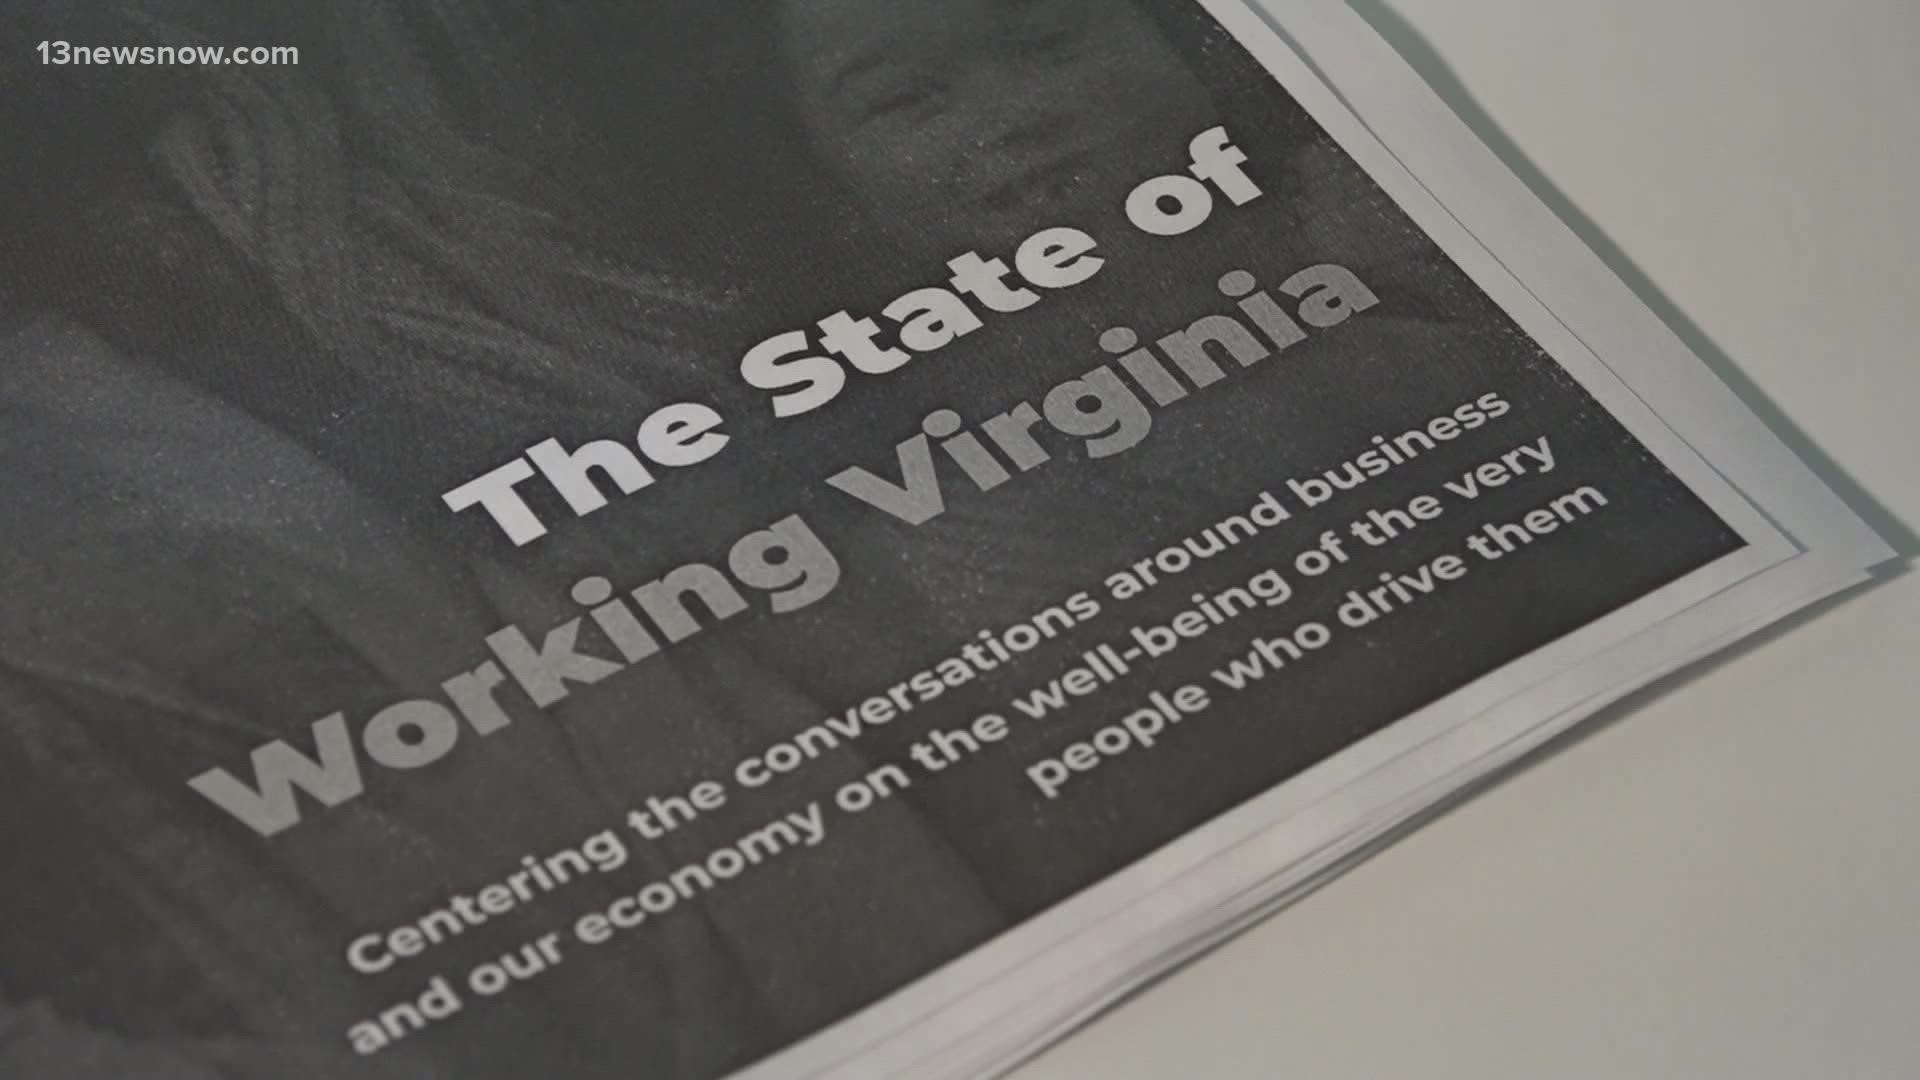 The Virginia Interfaith Center released its latest findings in its report of what it's like working in the State of Virginia.